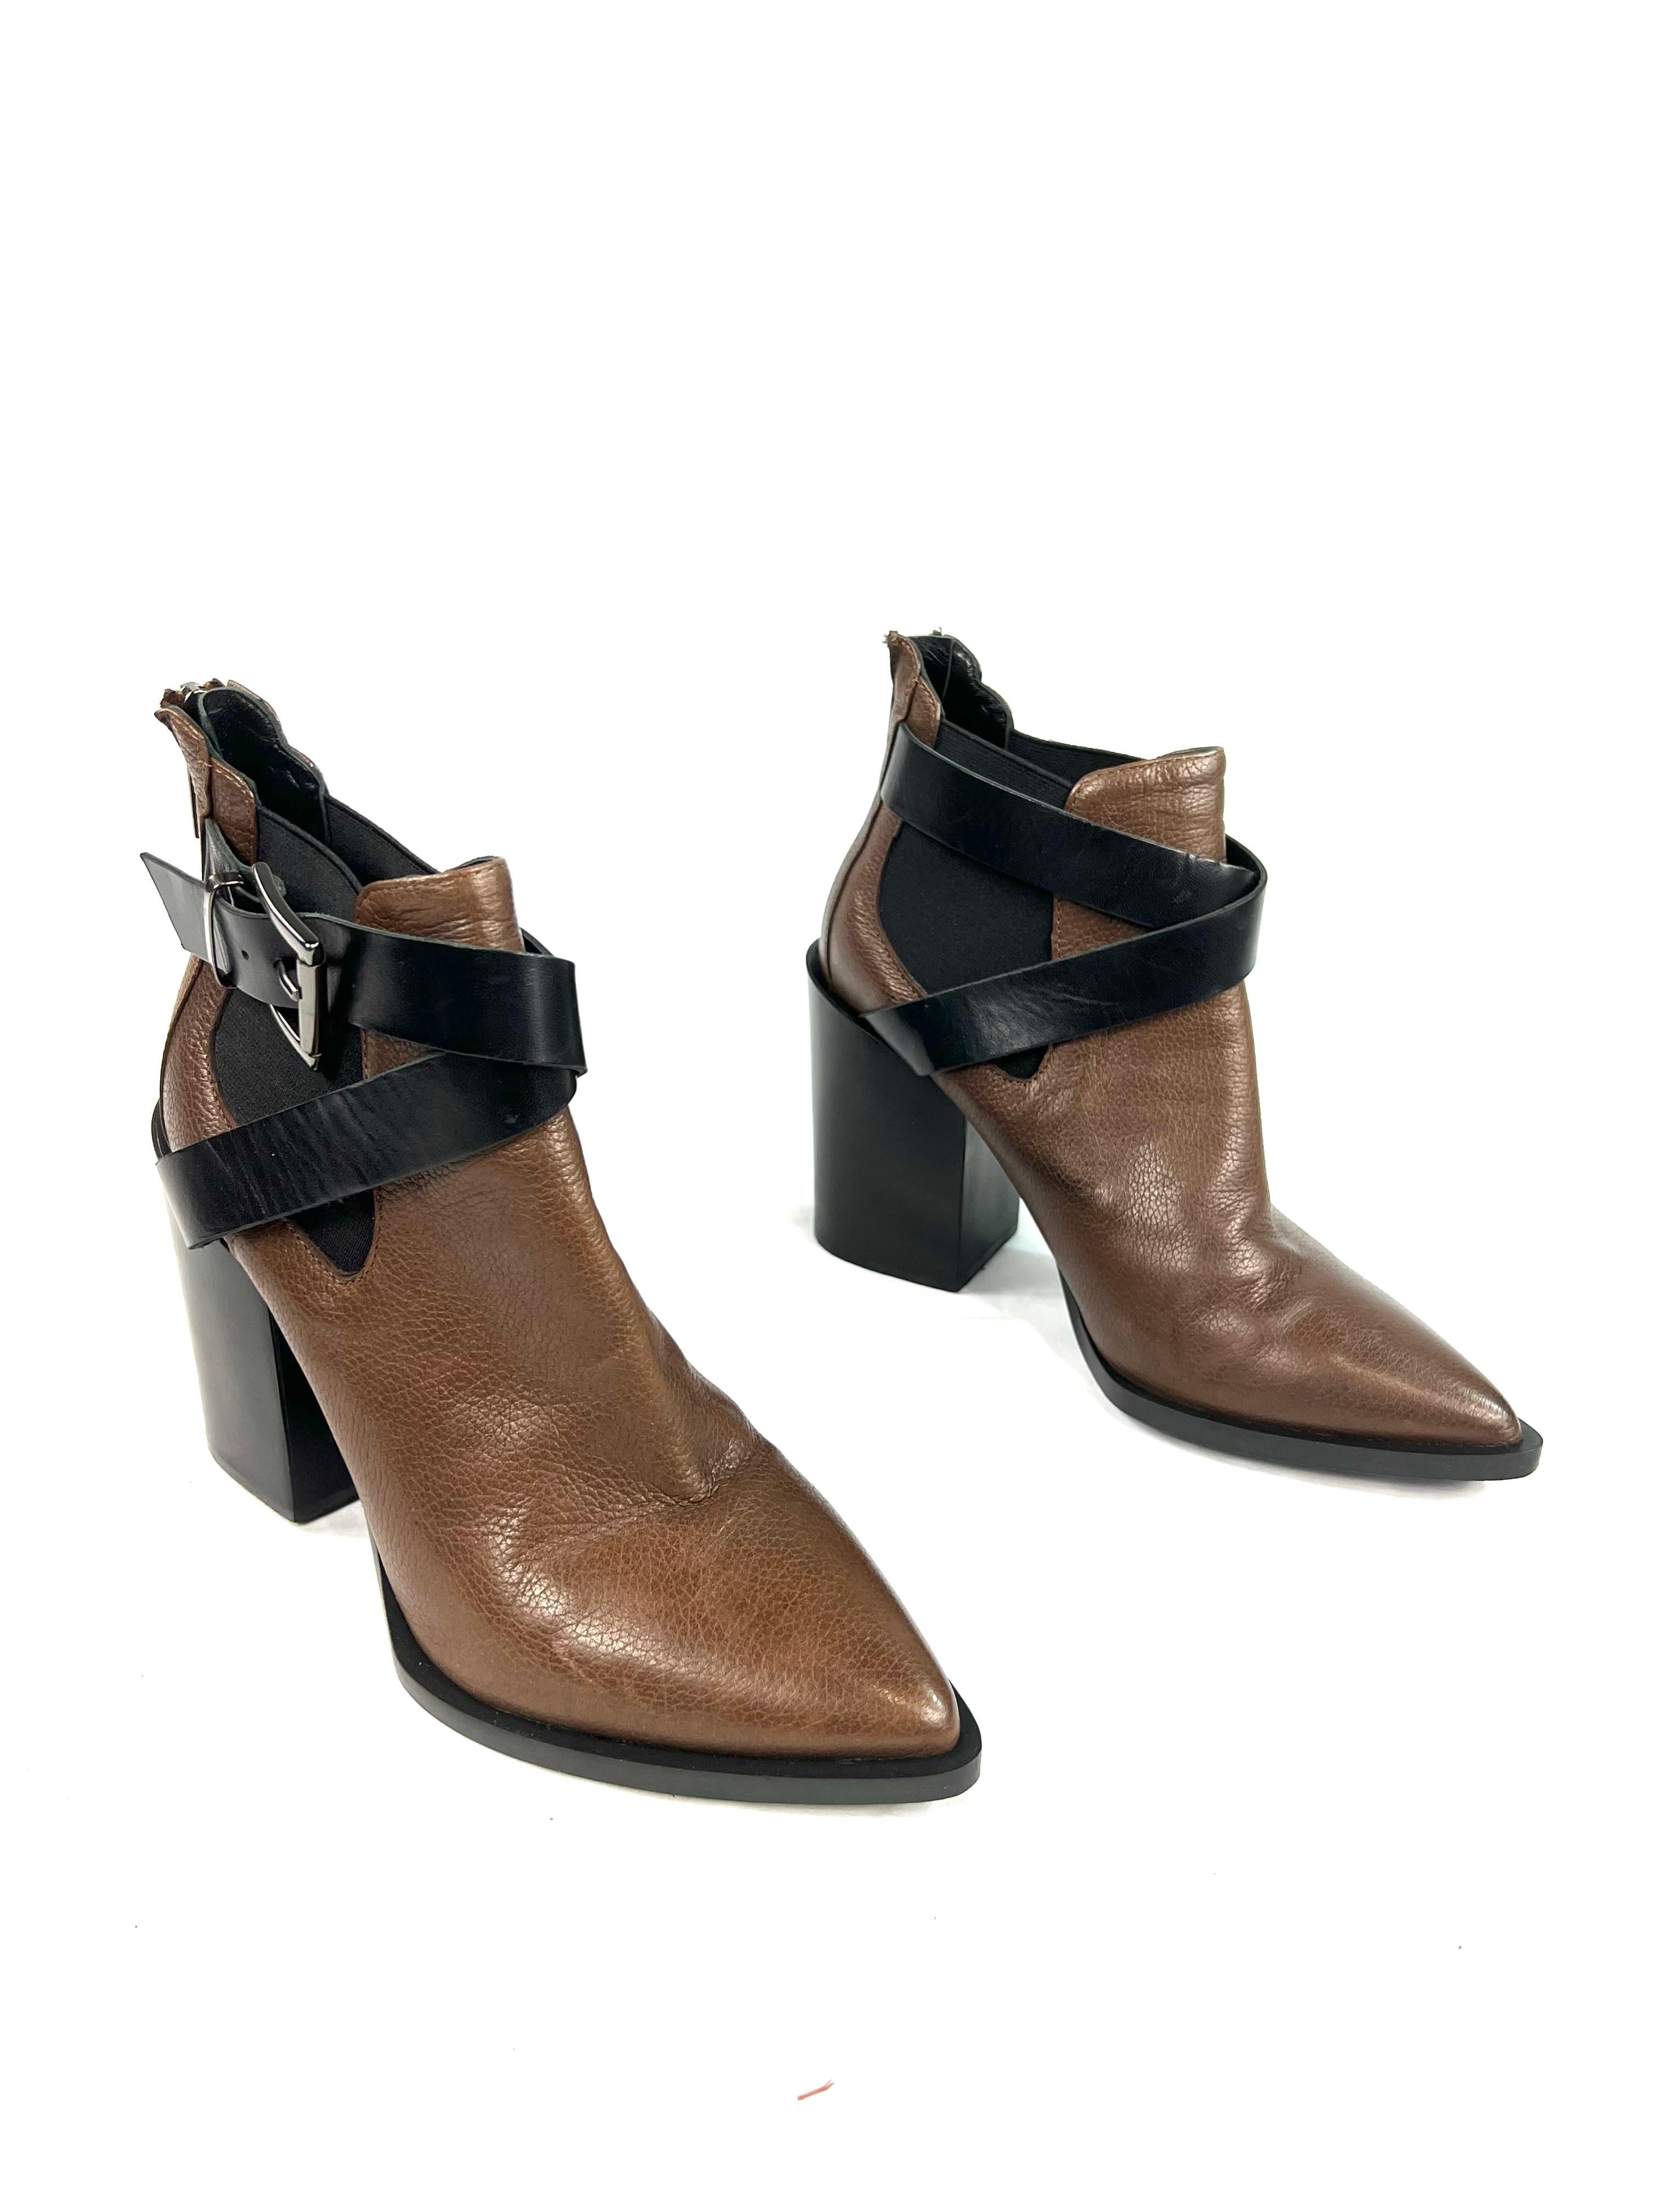 Product details:

The boots are made out of brown and black leather. It features silver tone side buckle detail, wide 4” high heel and rear zip closure. Comes with the original box.